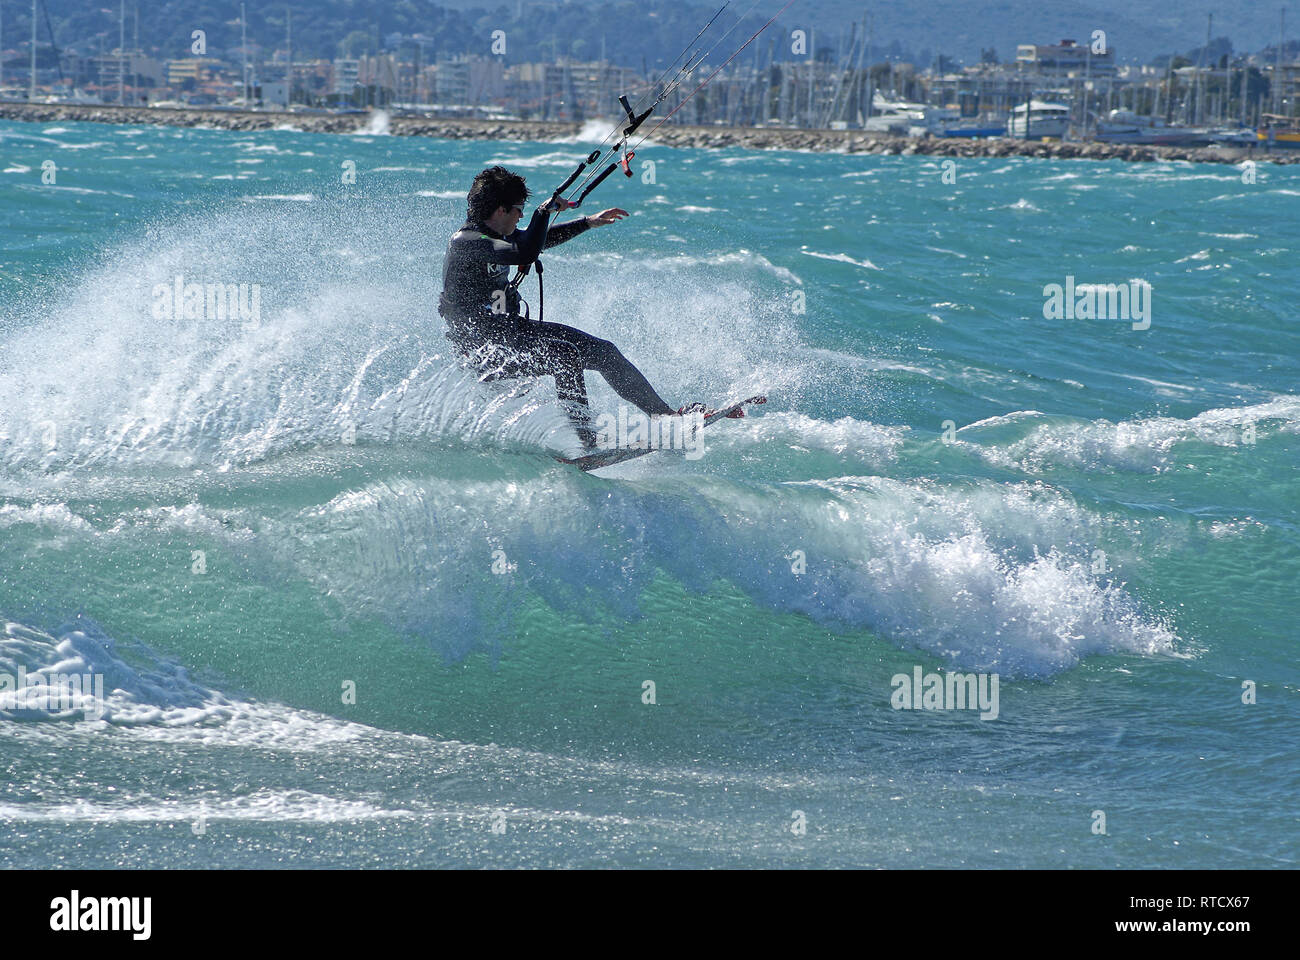 Kite boarder surfing a wave during a windy day at the end of winter in French riviera. (St Laurent du Var spot) Stock Photo